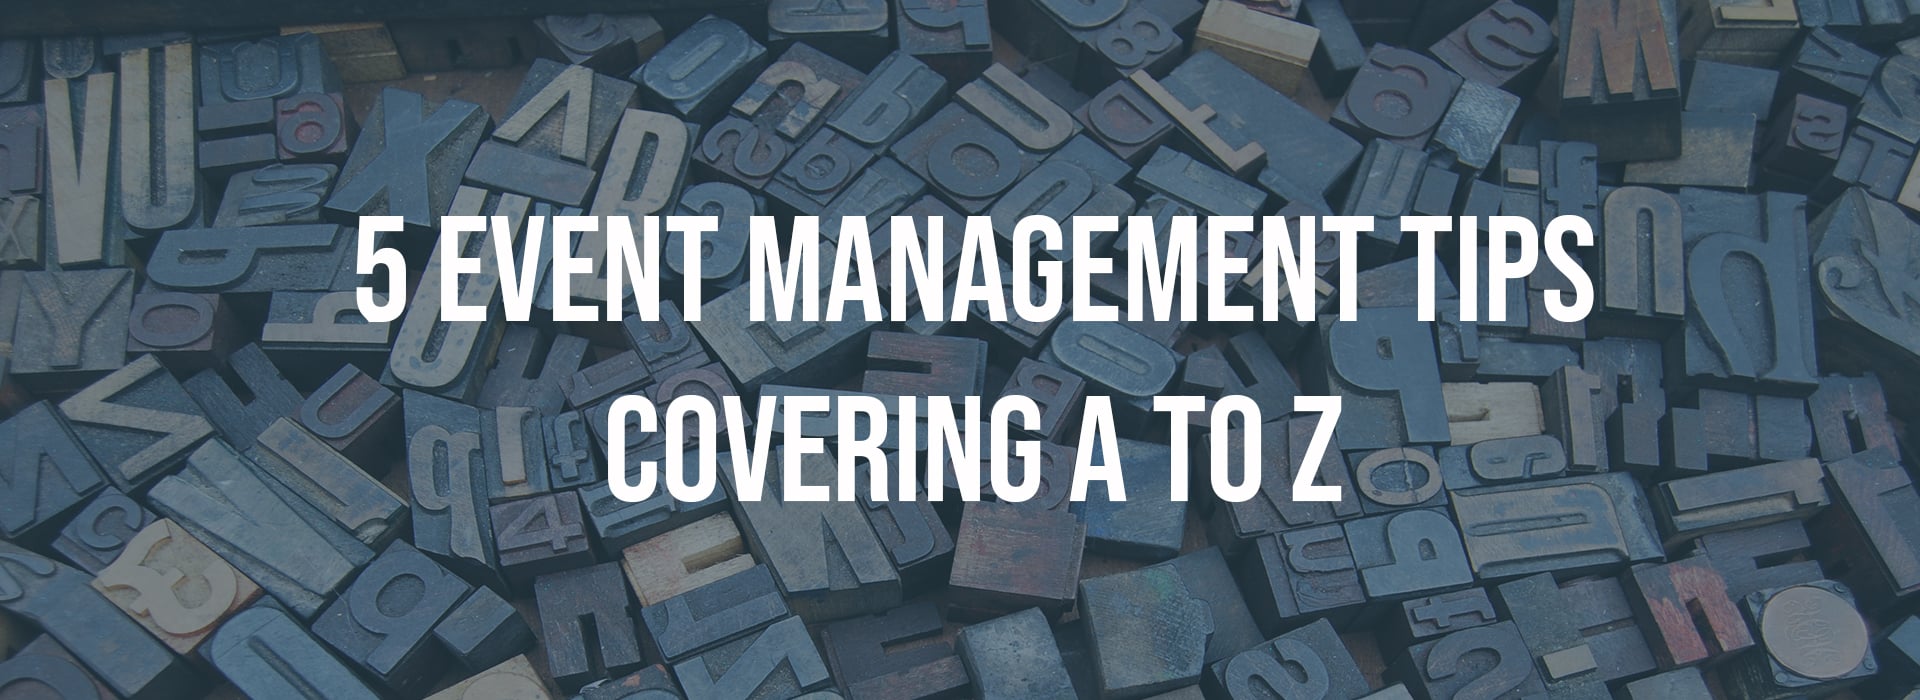 5 Event Management Tips Covering A to Z